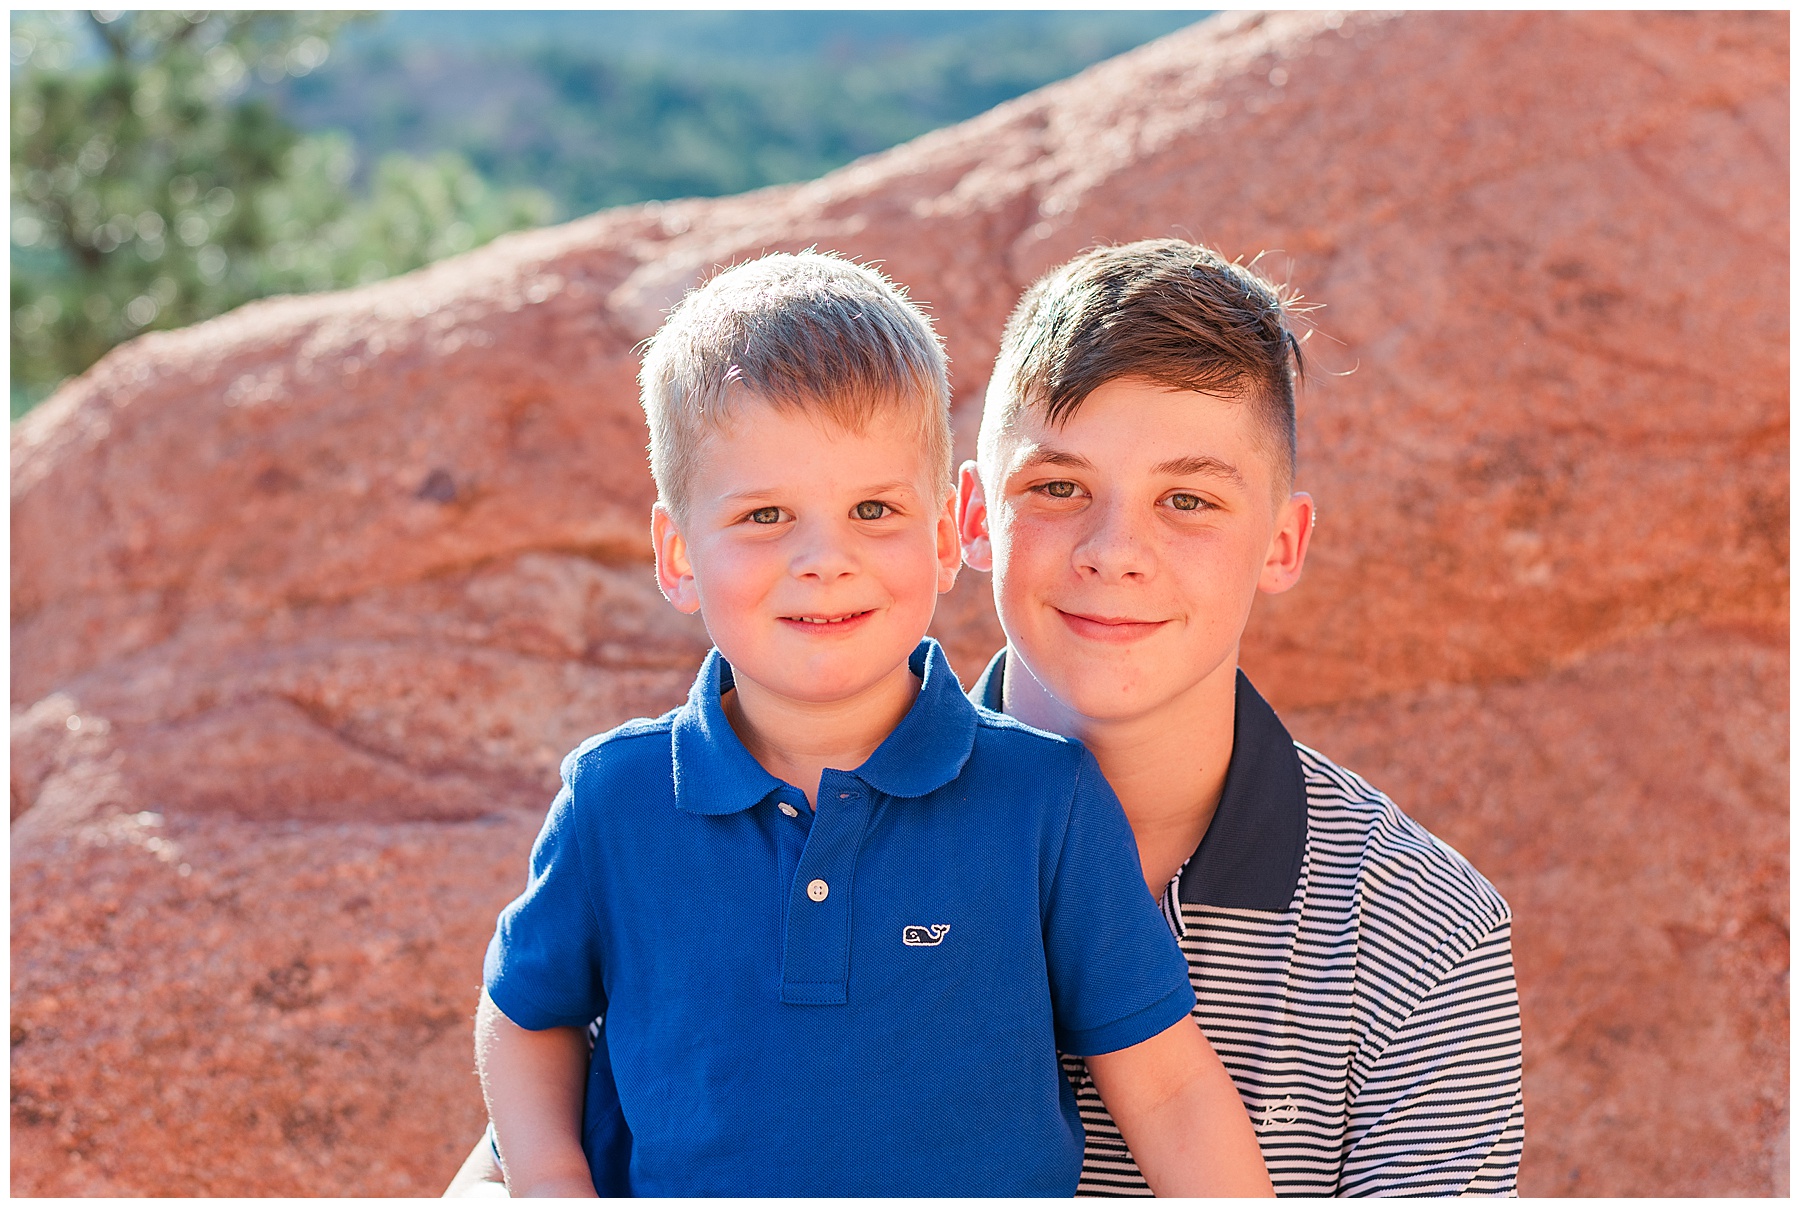 Older brother holds his little brother on his lap as they pose for light and airy photos with Catherine Chamberlain Photography based in Northern Colorado